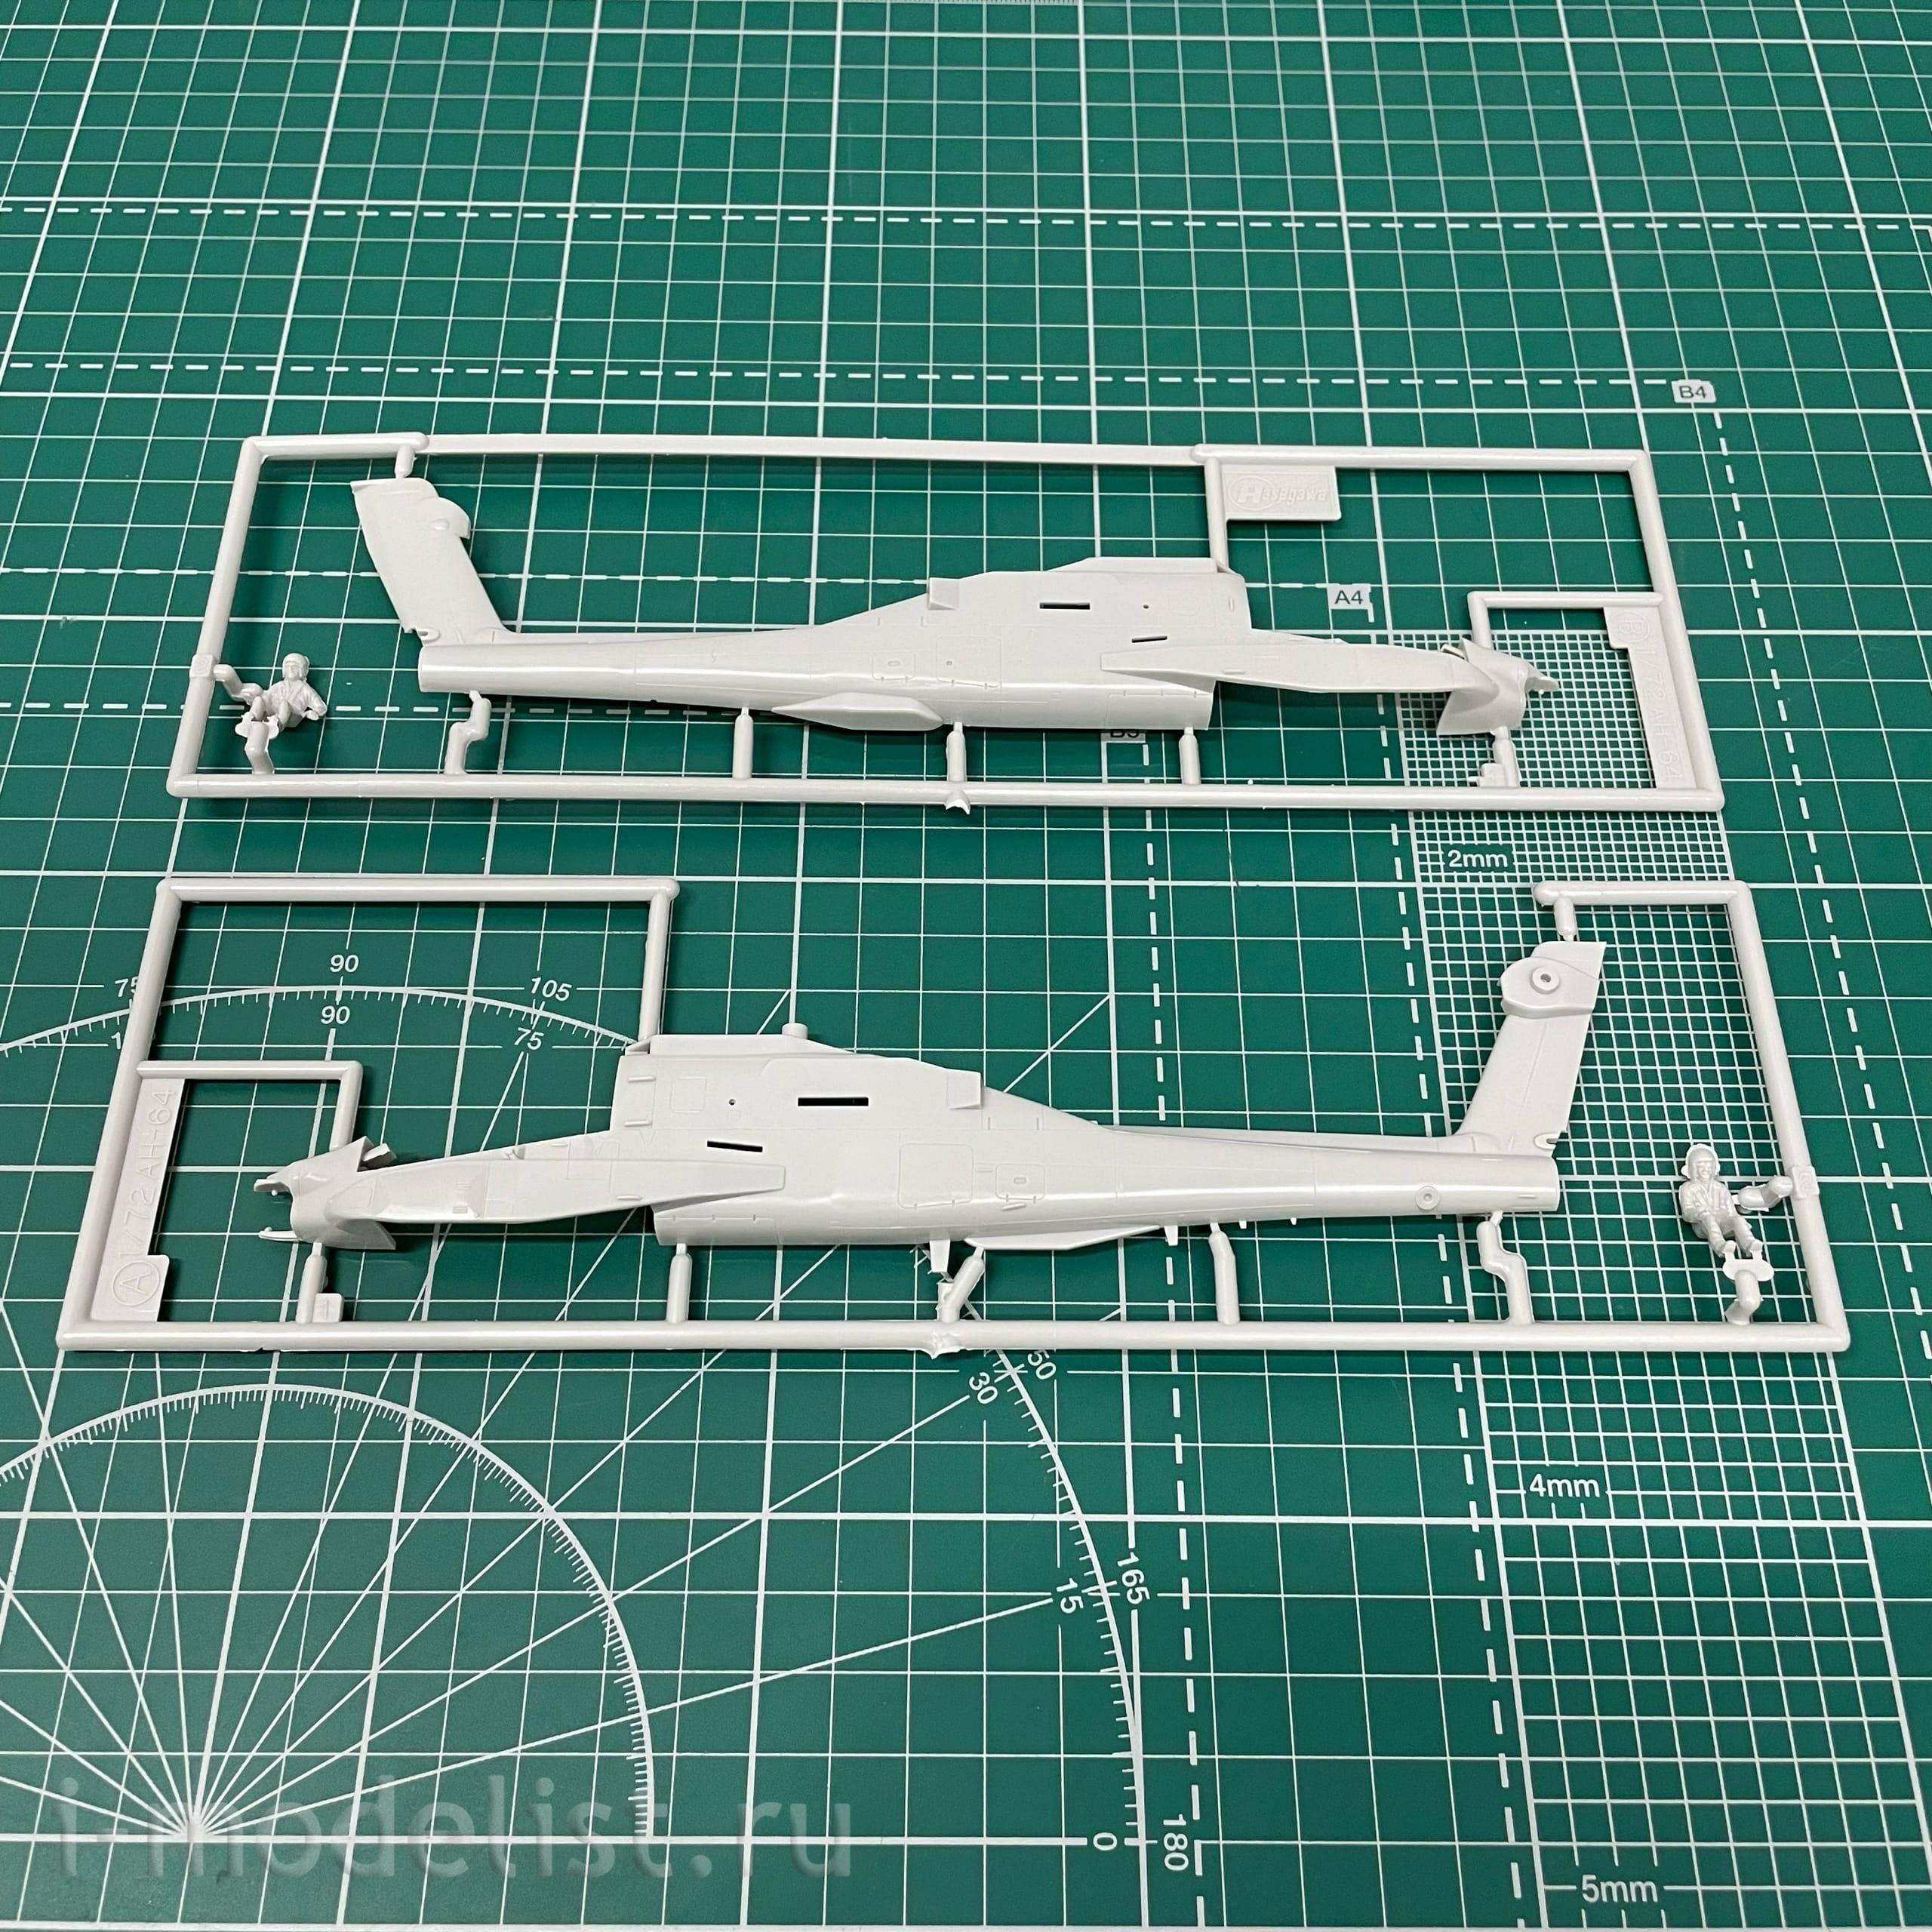 00436 Hasegawa 1/72 Ah-64A Apache Helicopter